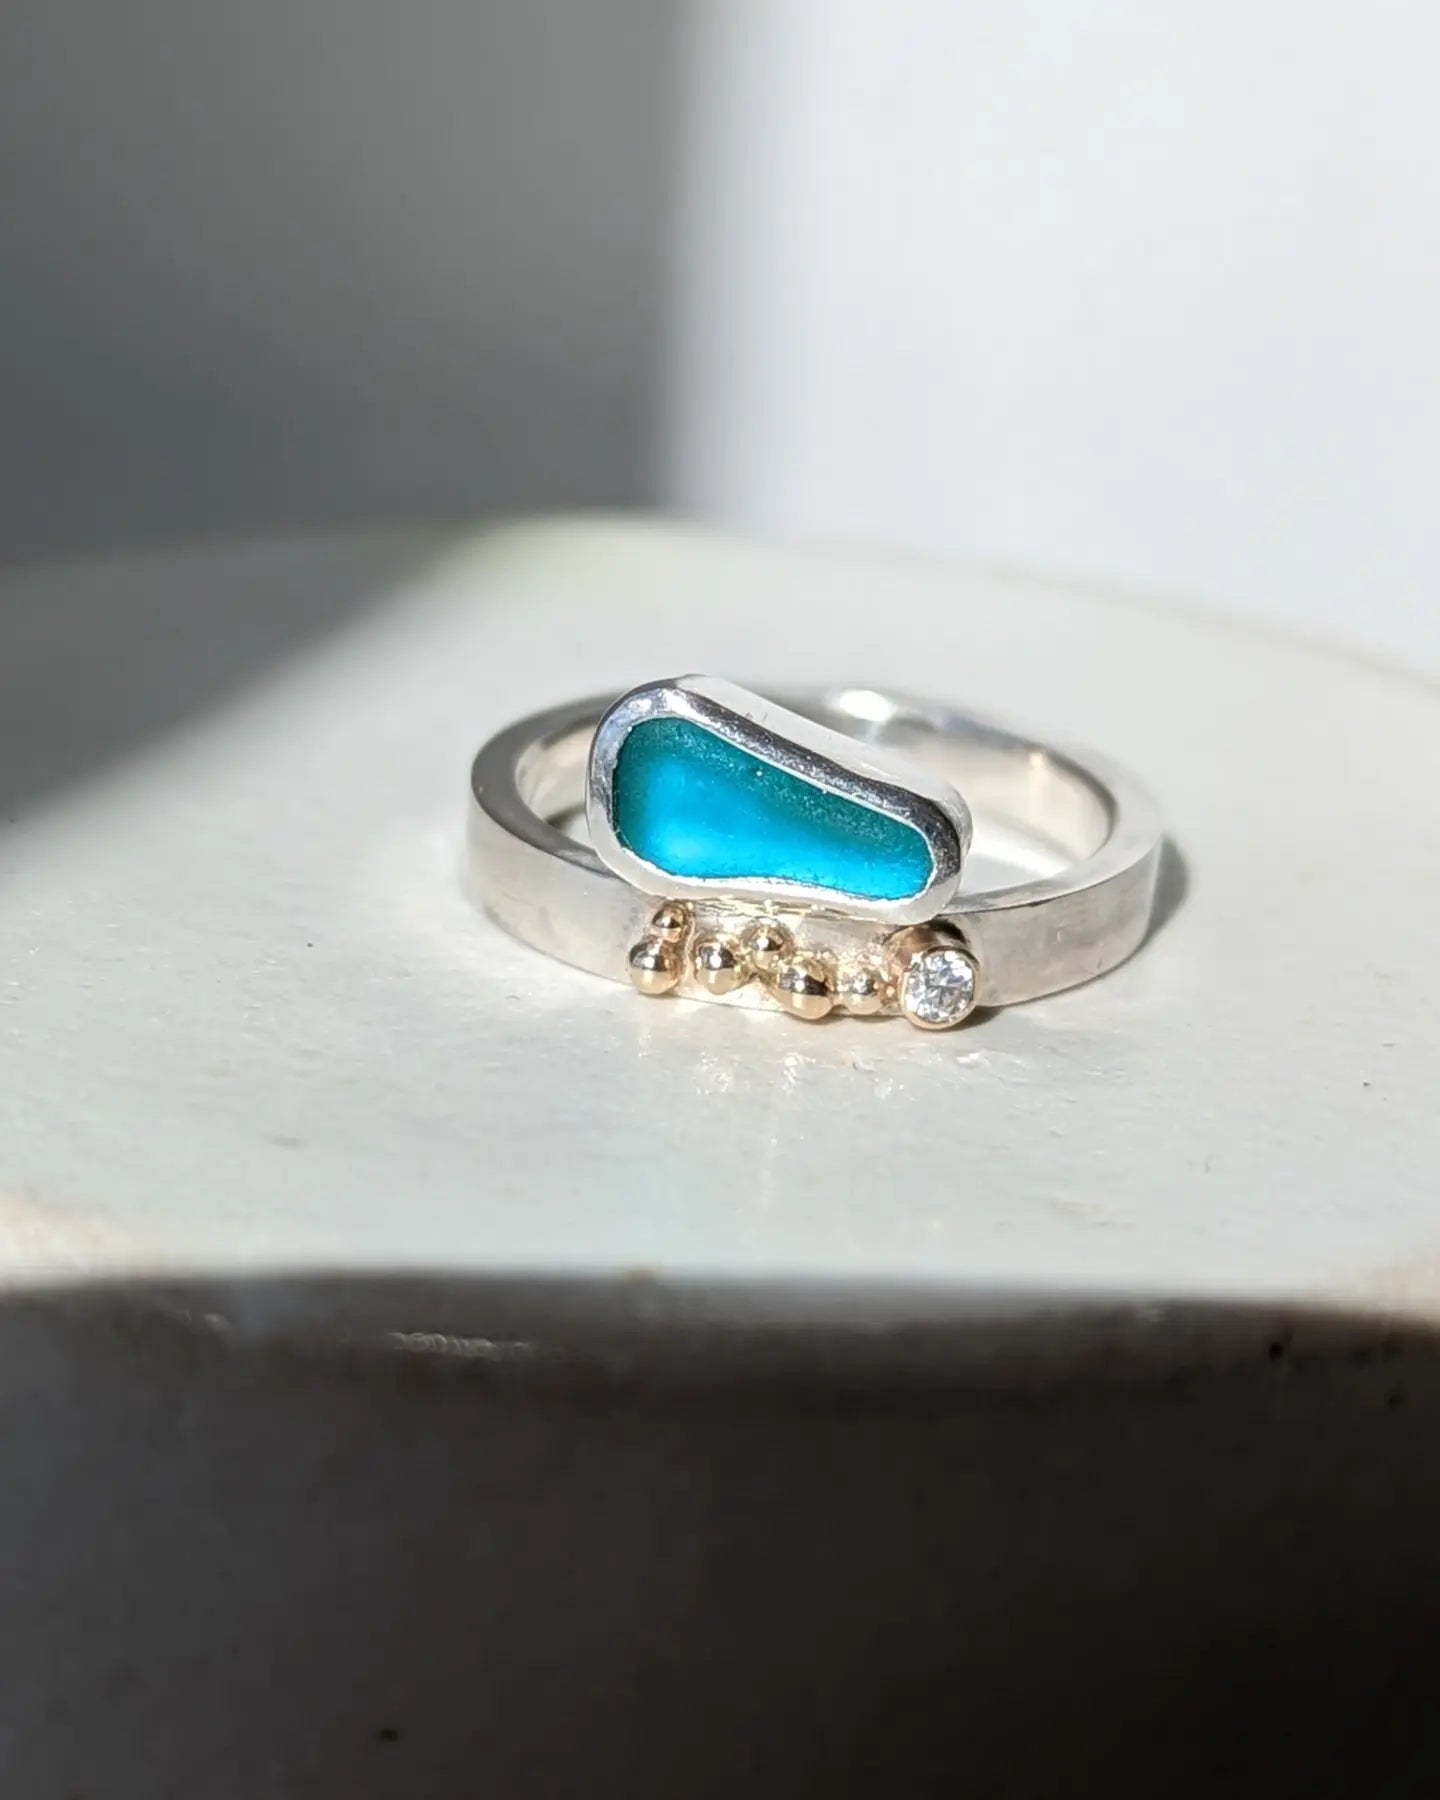 Turquoise sea glass ring with gold granules and moissanite - Booblinka Jewellery